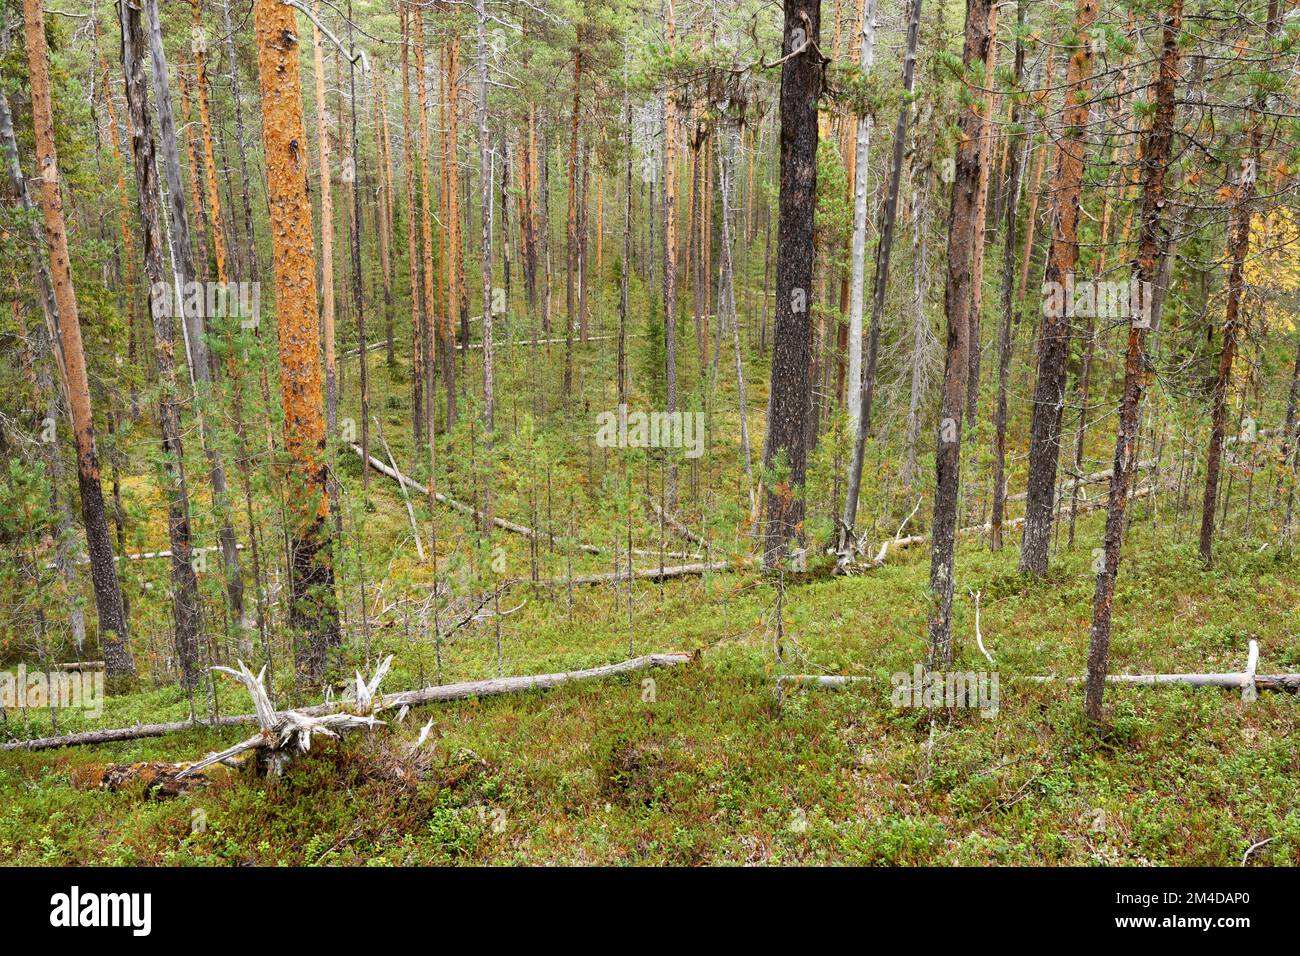 An old-growth Pine forest with deadwood in autumnal Oulanka National Park, Northern Finland Stock Photo